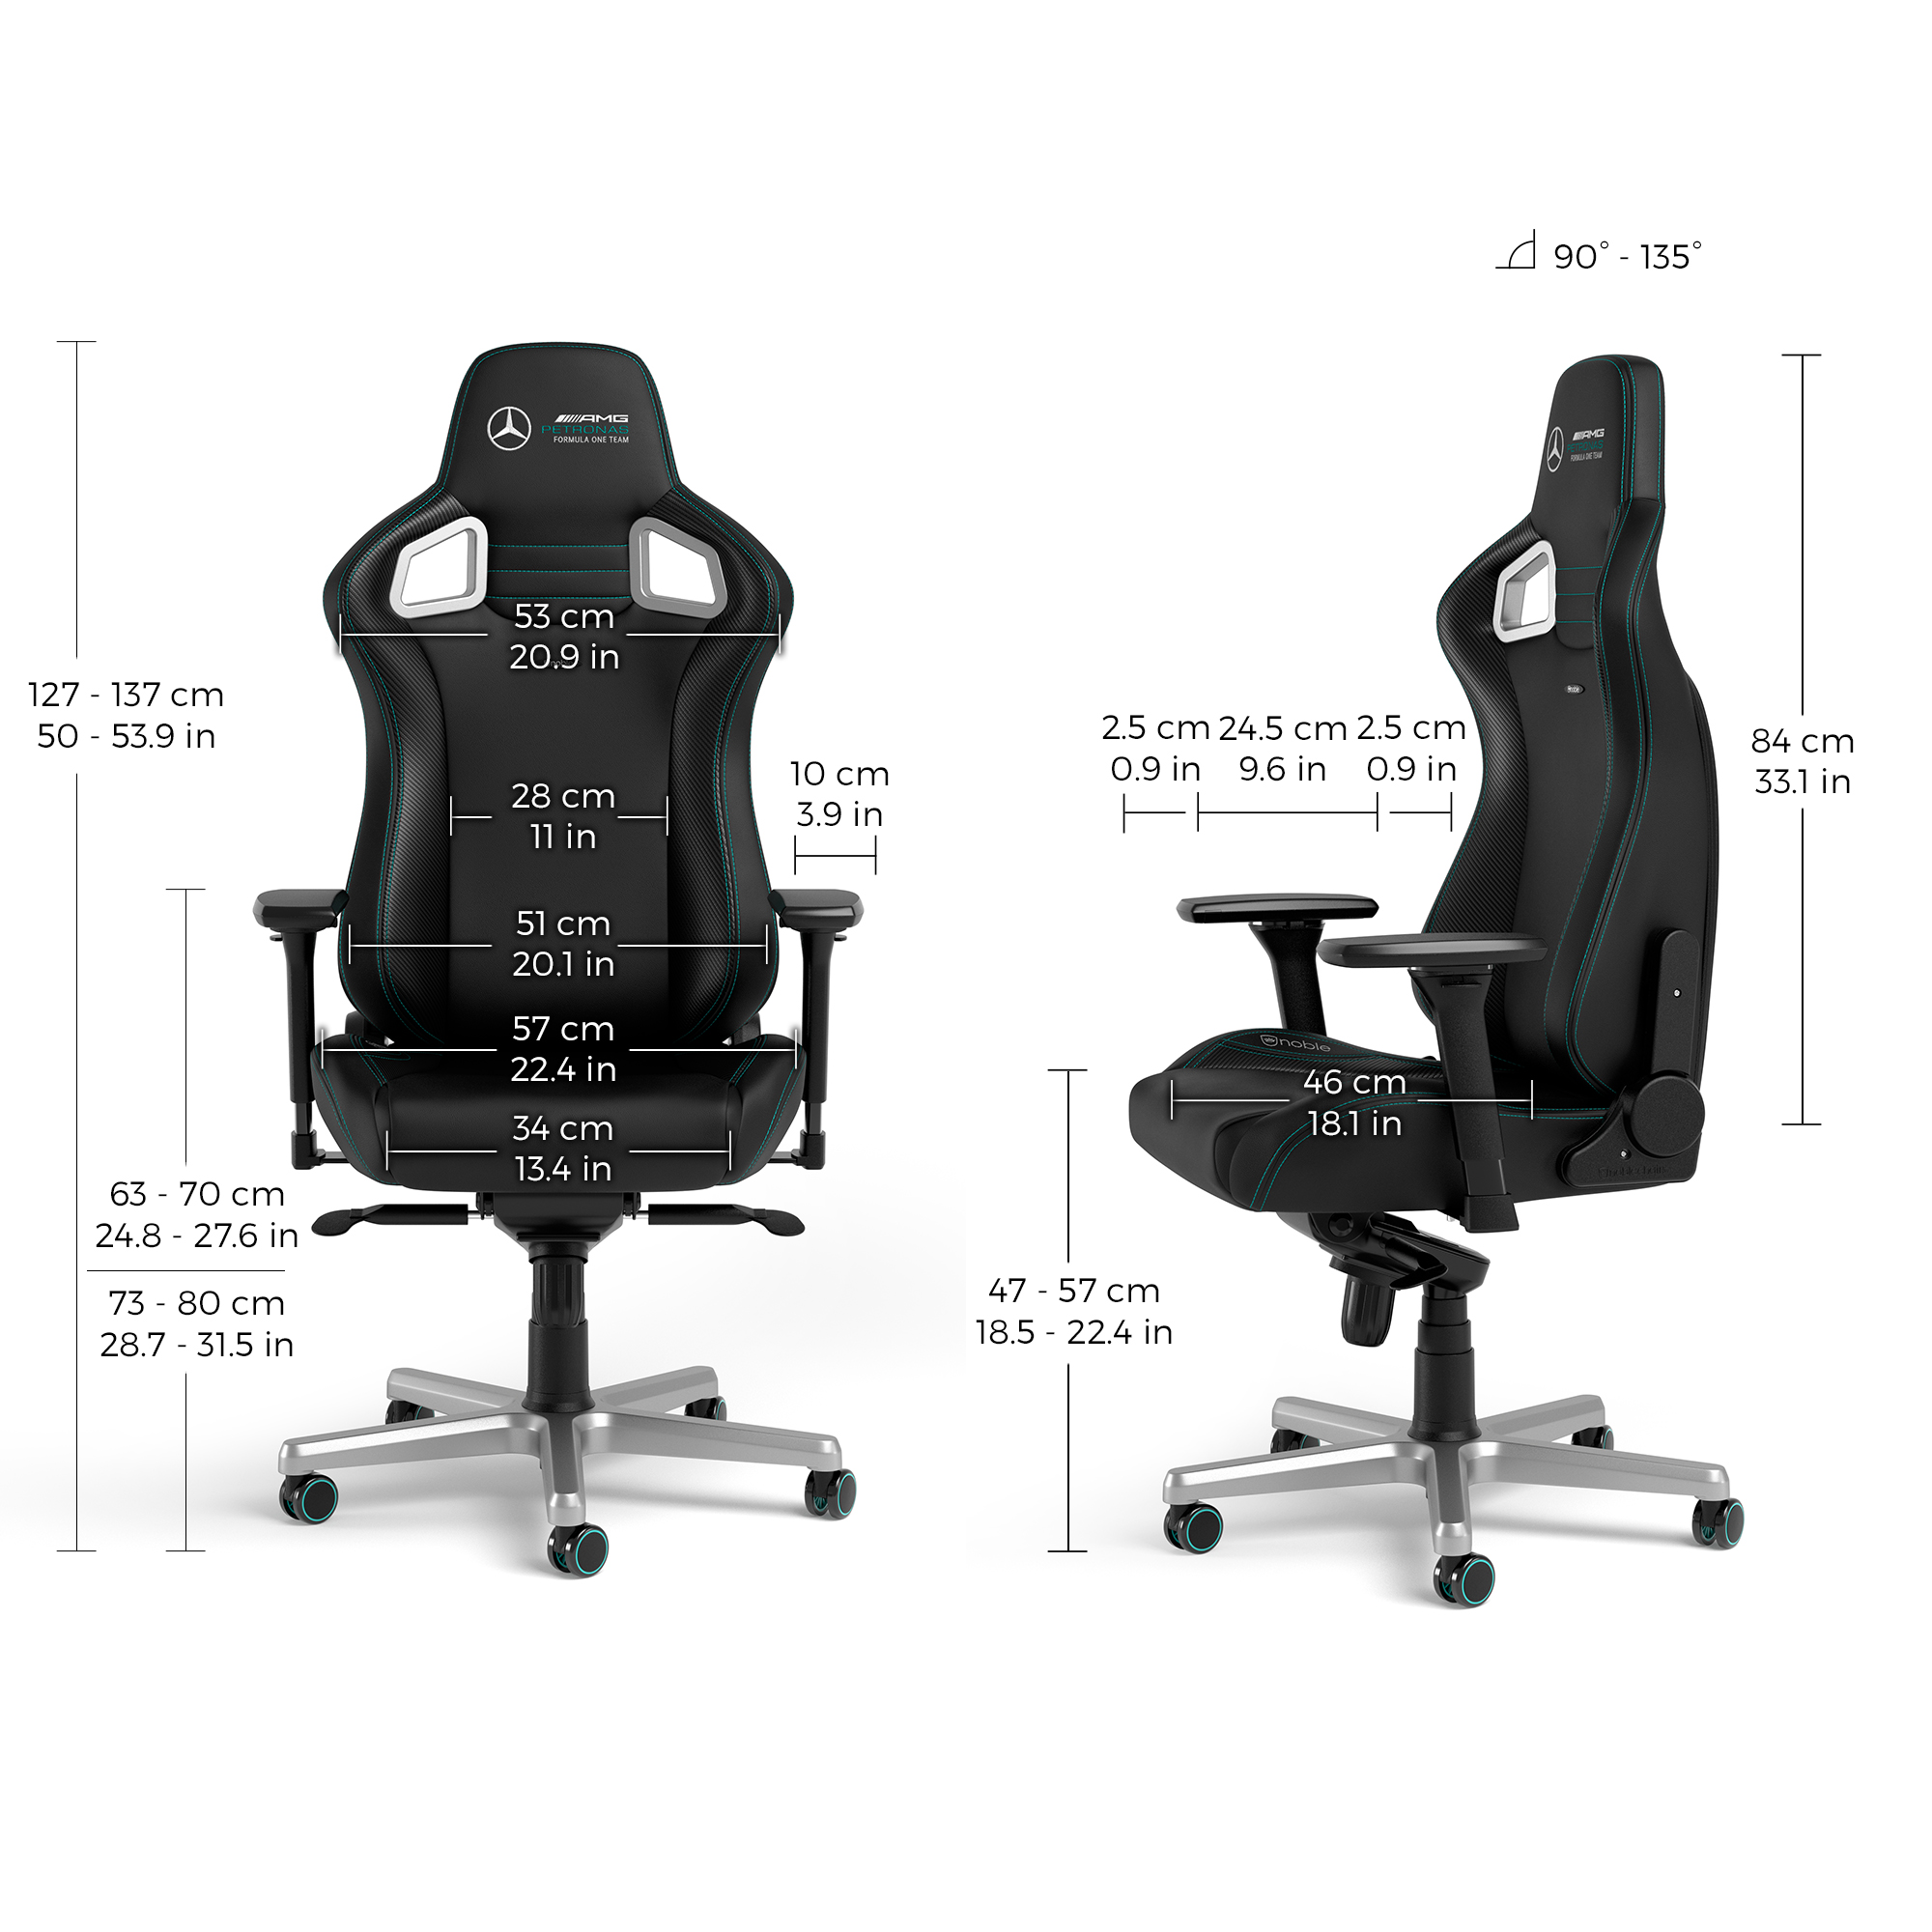 noblechairs - noblechairs EPIC Gaming Chair - Mercedes-AMG Petronas Formula One Team Edition